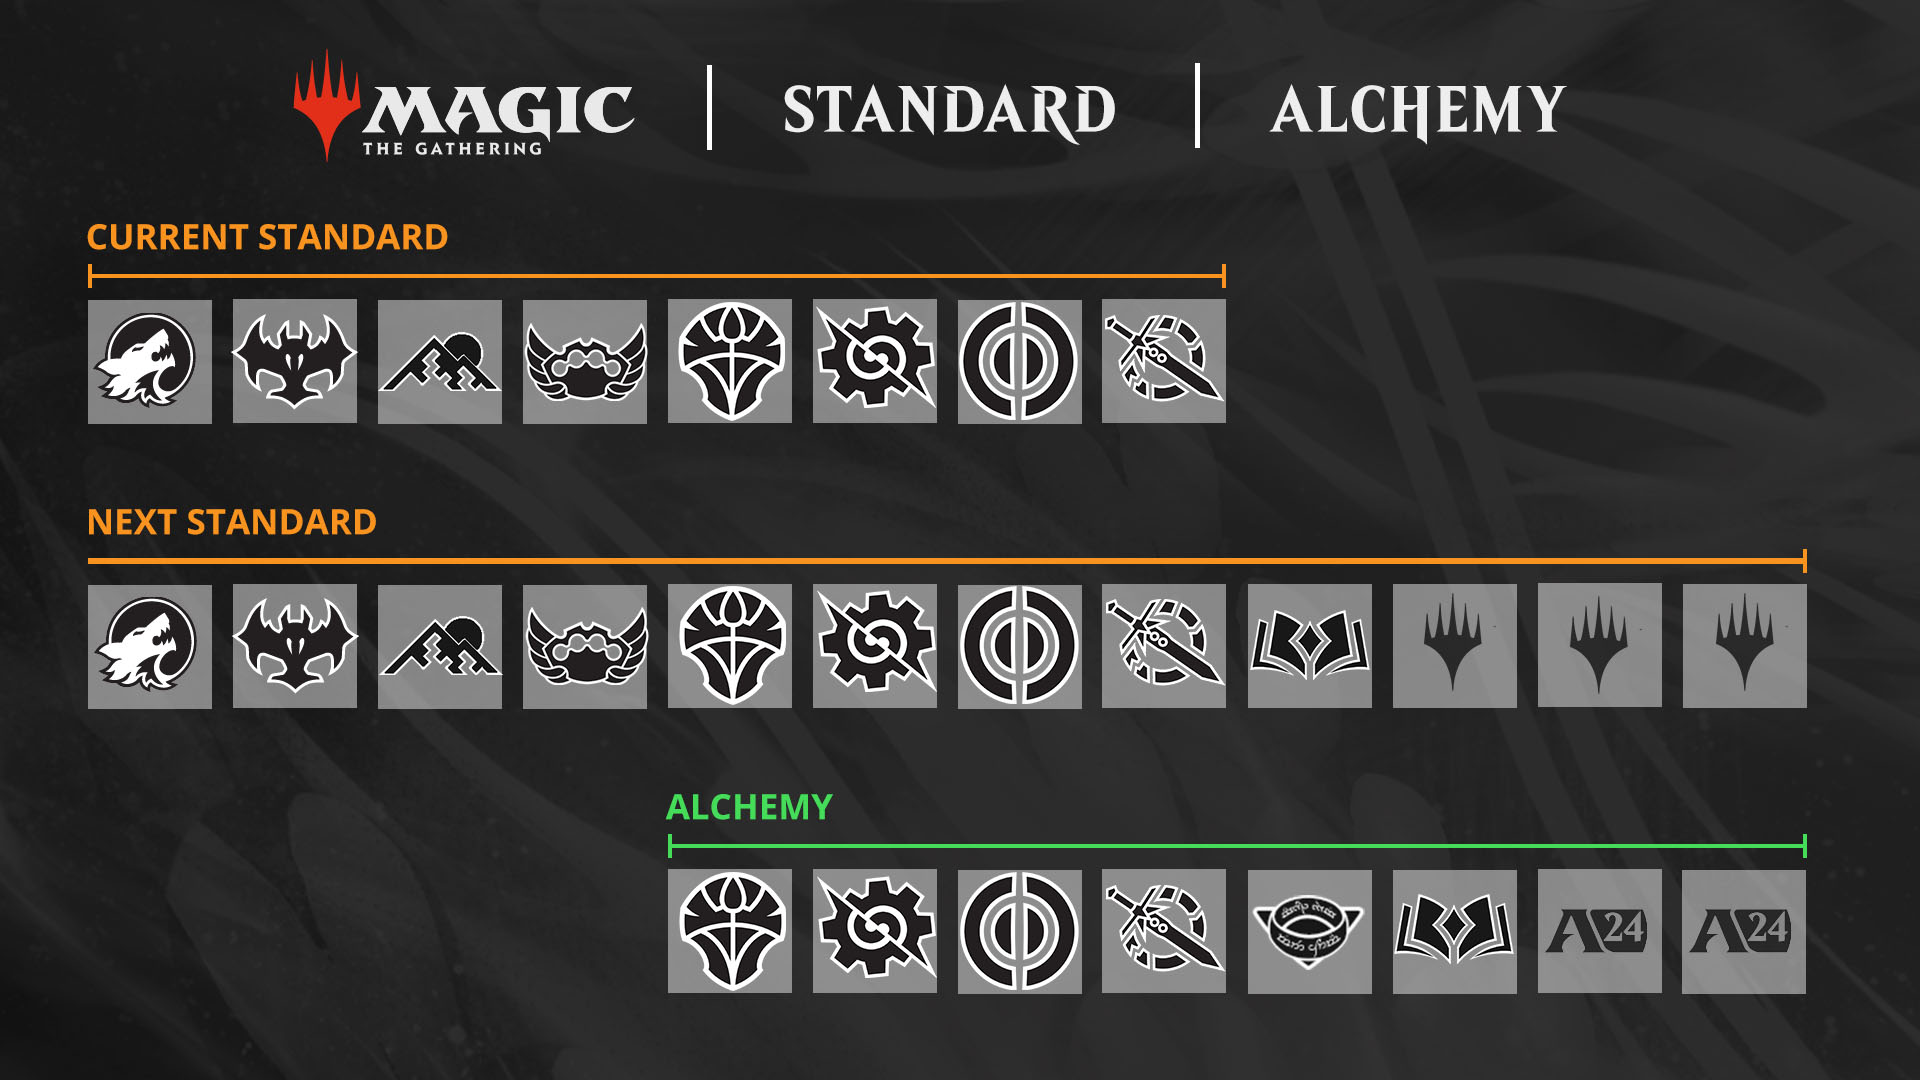 Graphic displaying icons of sets that are rotating into and out of Standard and Alchemy for the new Magic year beginning in September with the release of Wilds of Eldraine